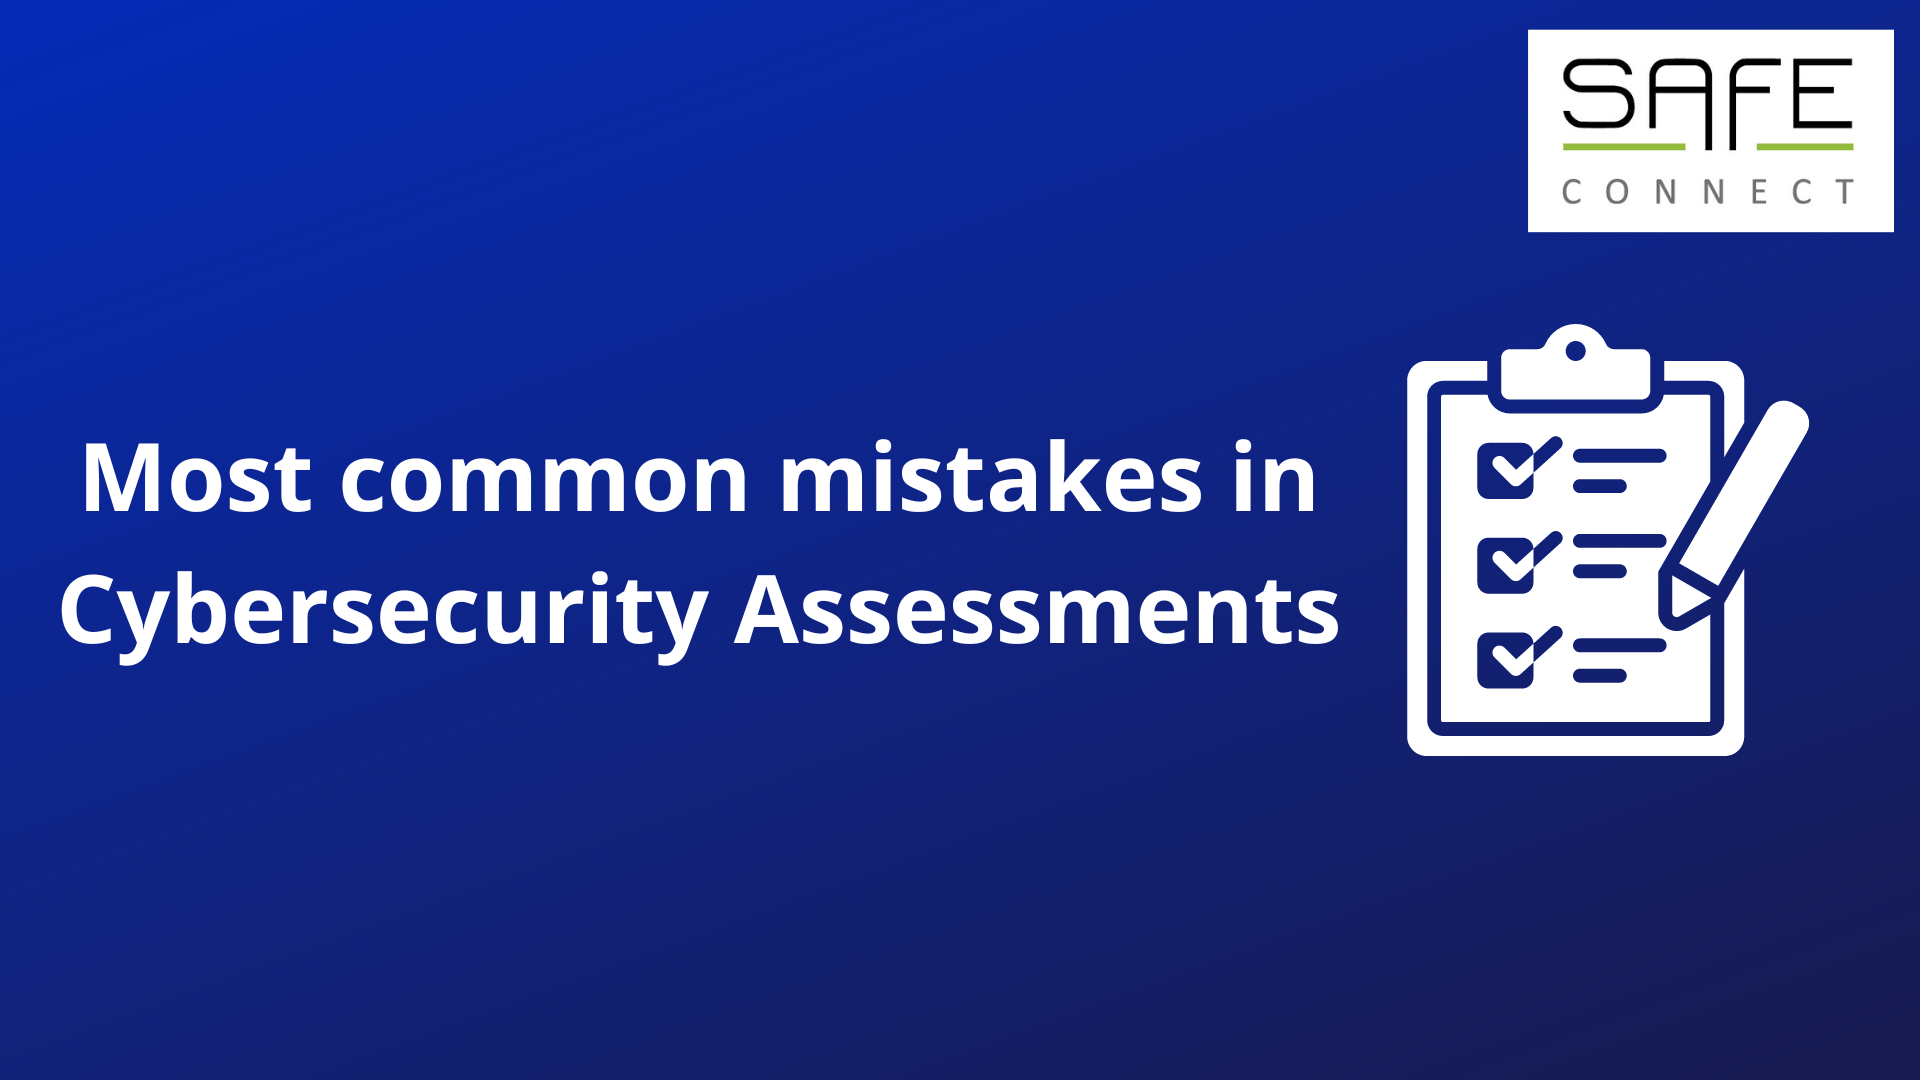 Most common mistakes in Cybersecurity Assessments